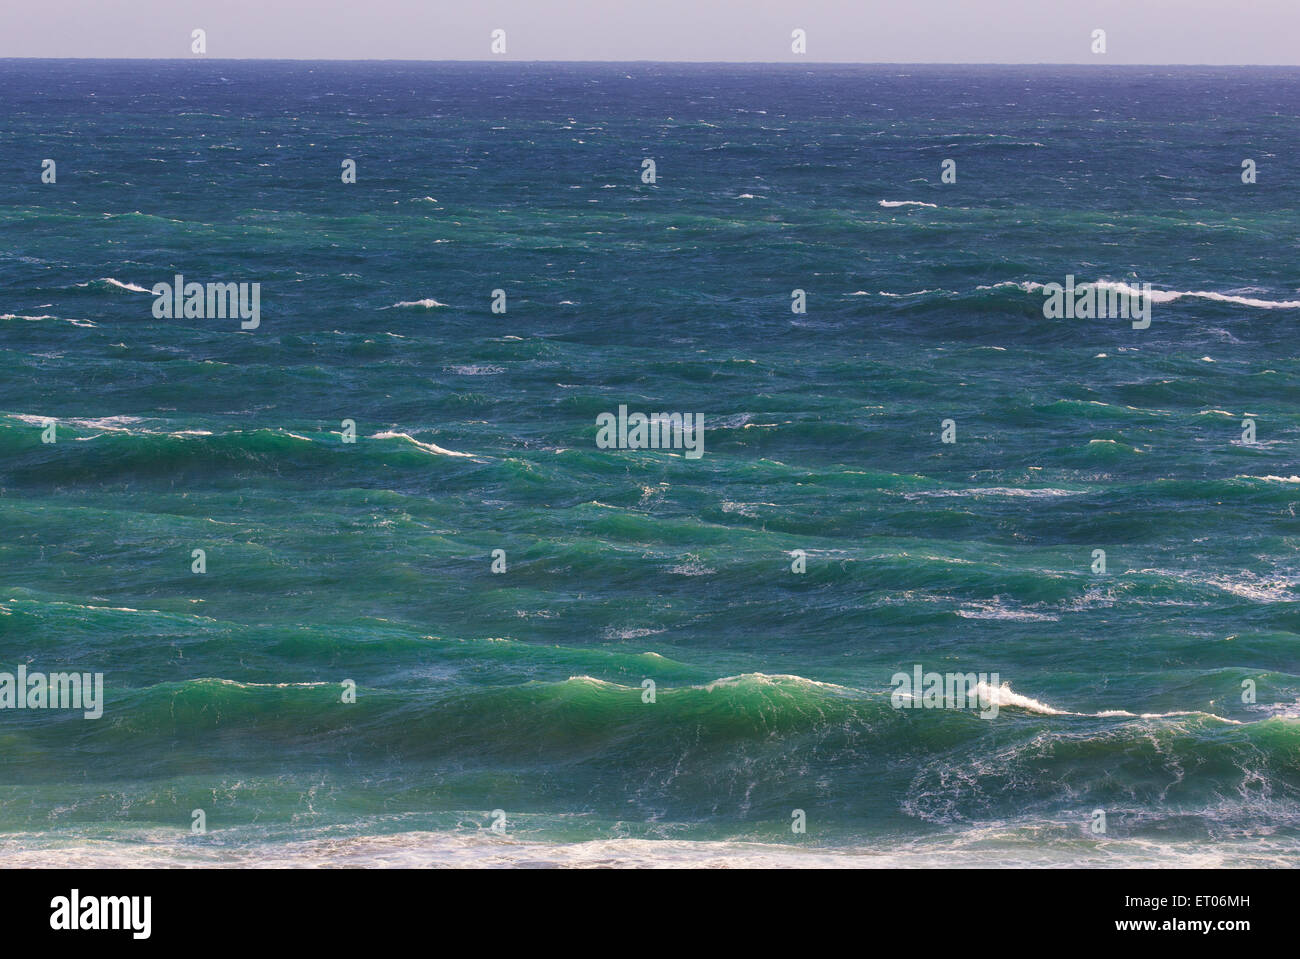 Choppy surf conditions in the sea off the coast of the  Great Ocean Road, Victoria, Australia Stock Photo